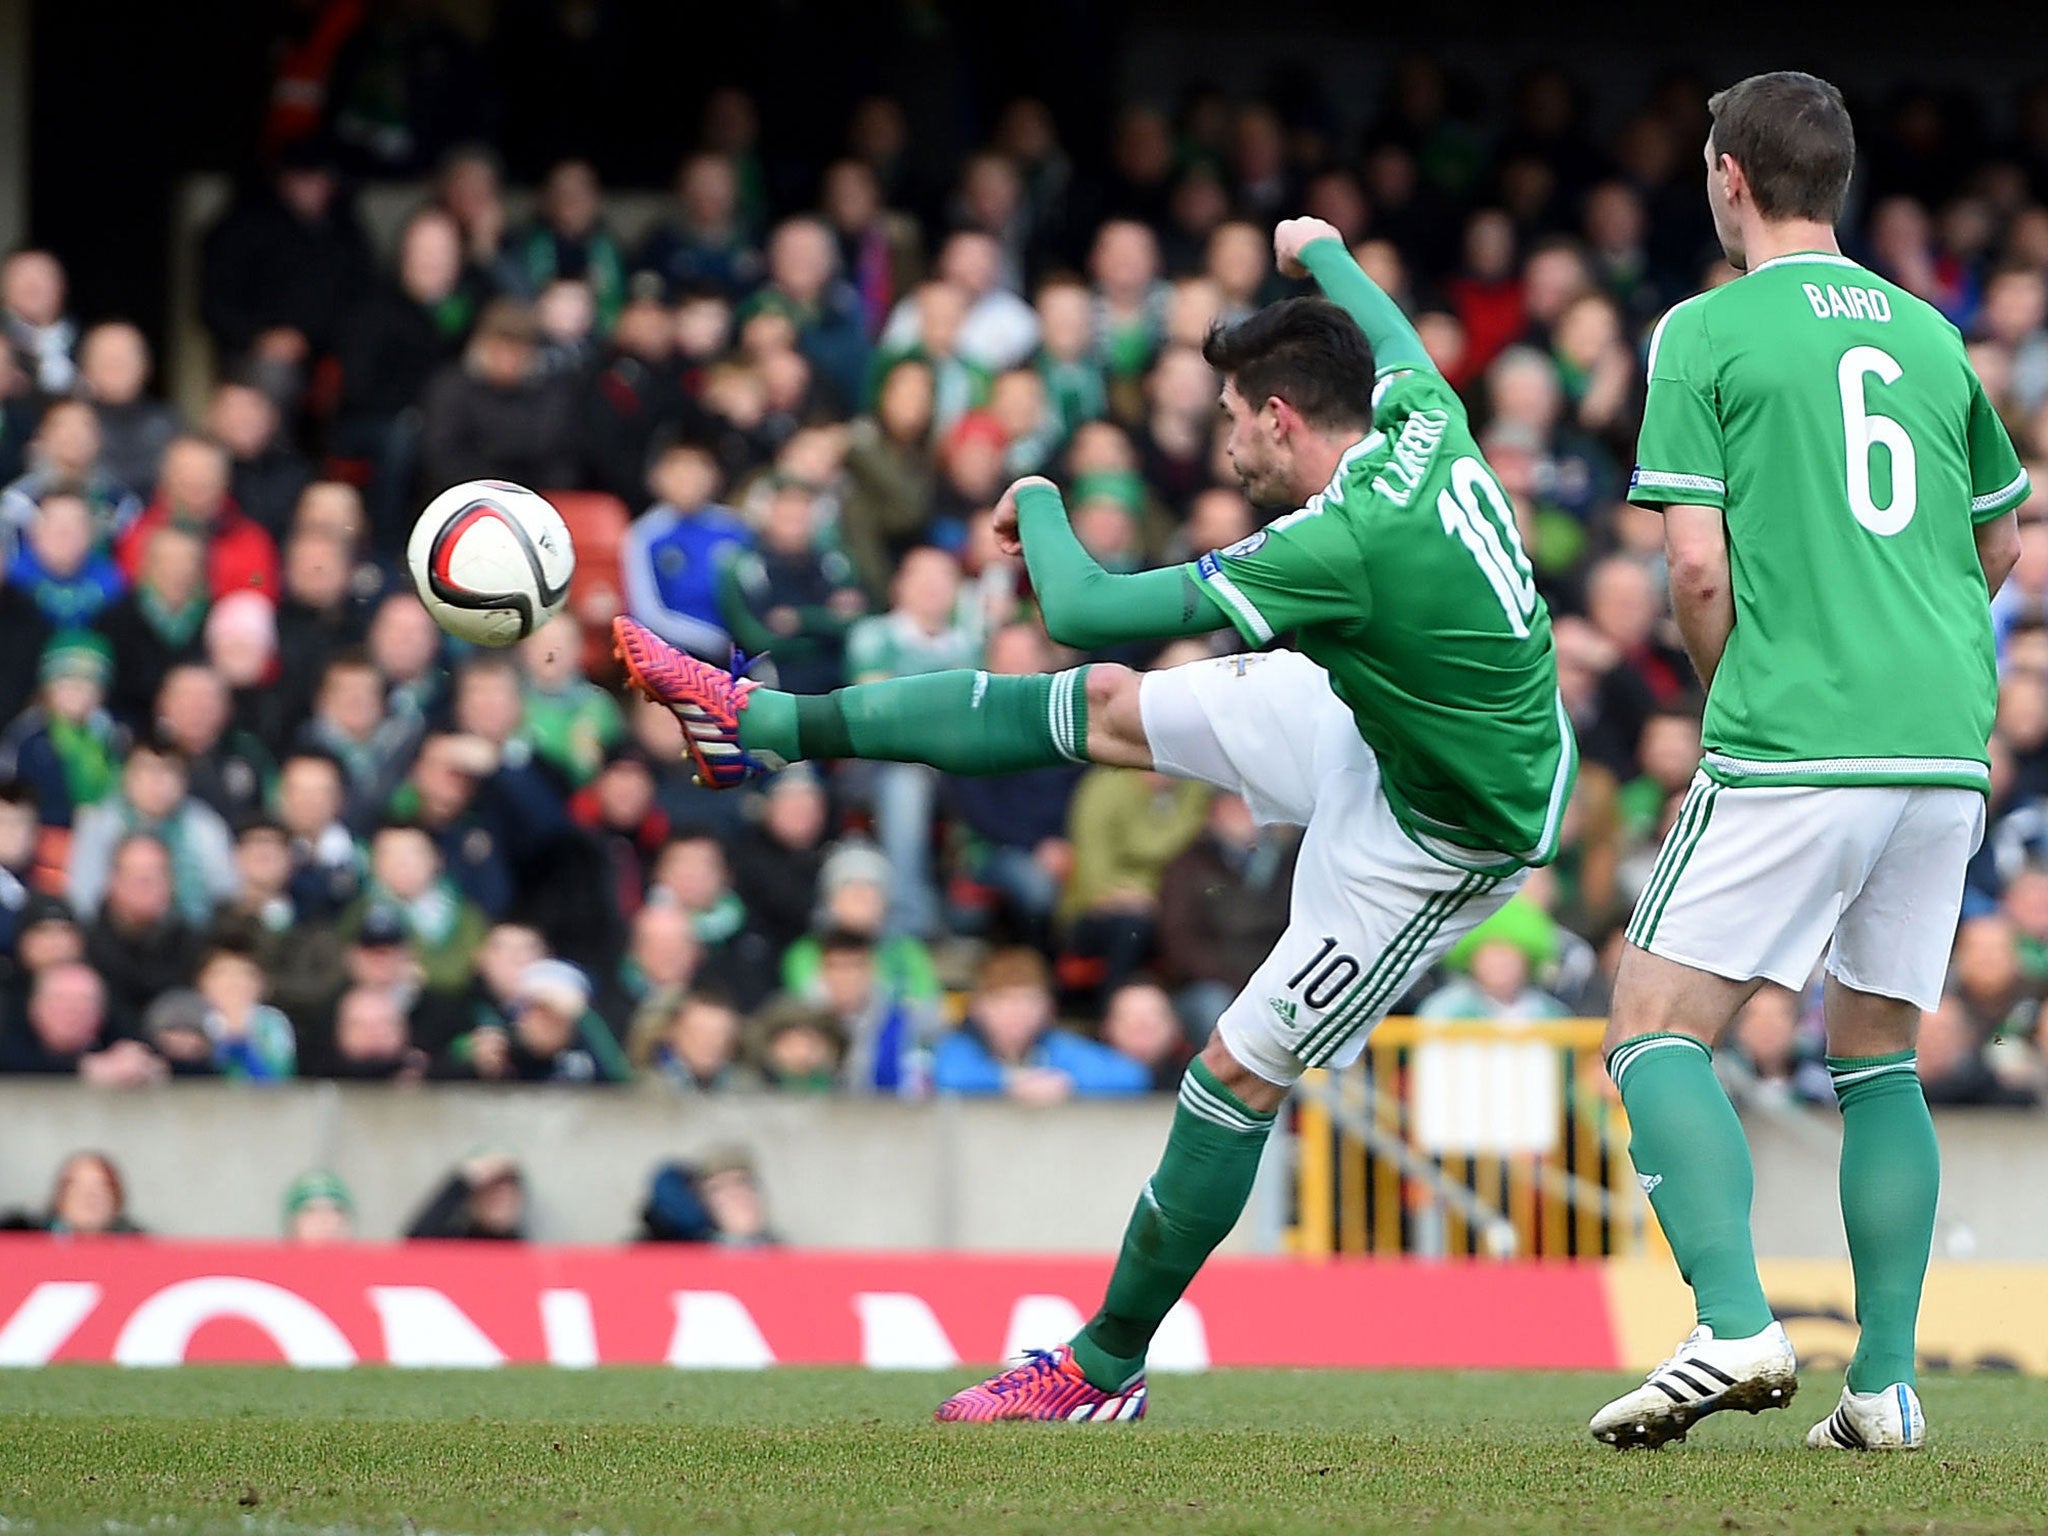 Kyle Lafferty volleys home the first of his two goals for Northern Ireland